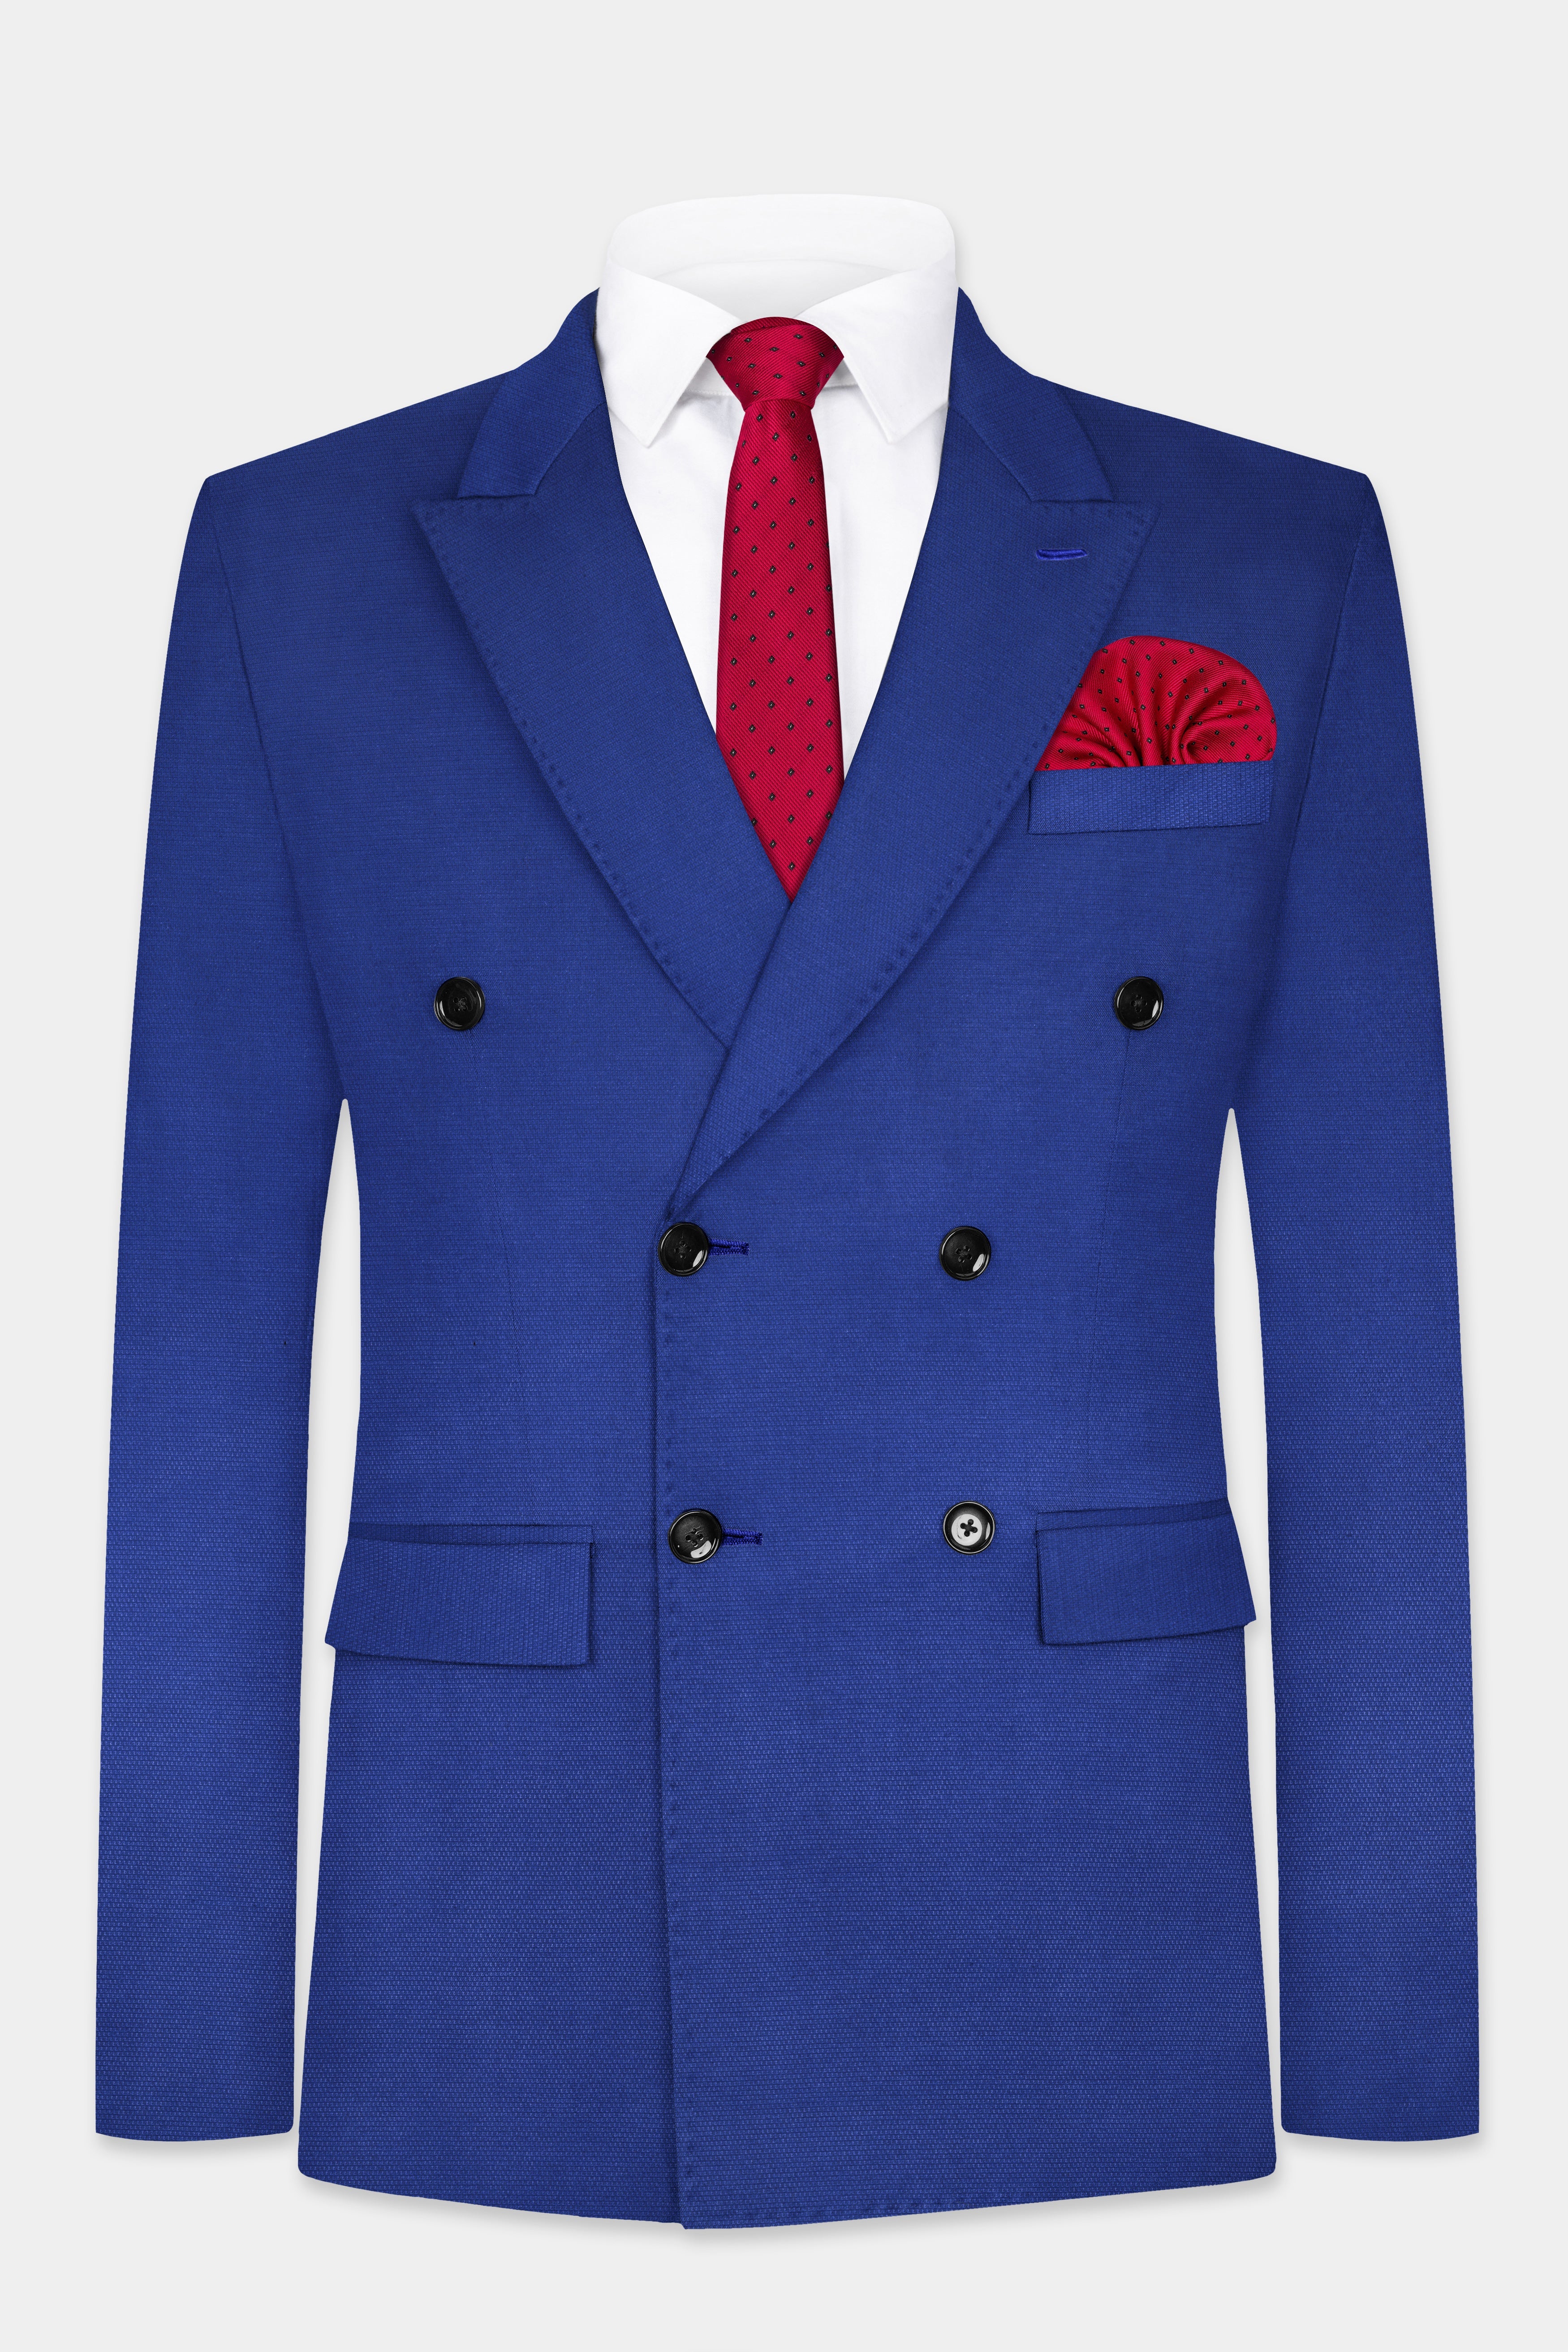 Catalina Blue Double-Breasted Wool Blend Blazer